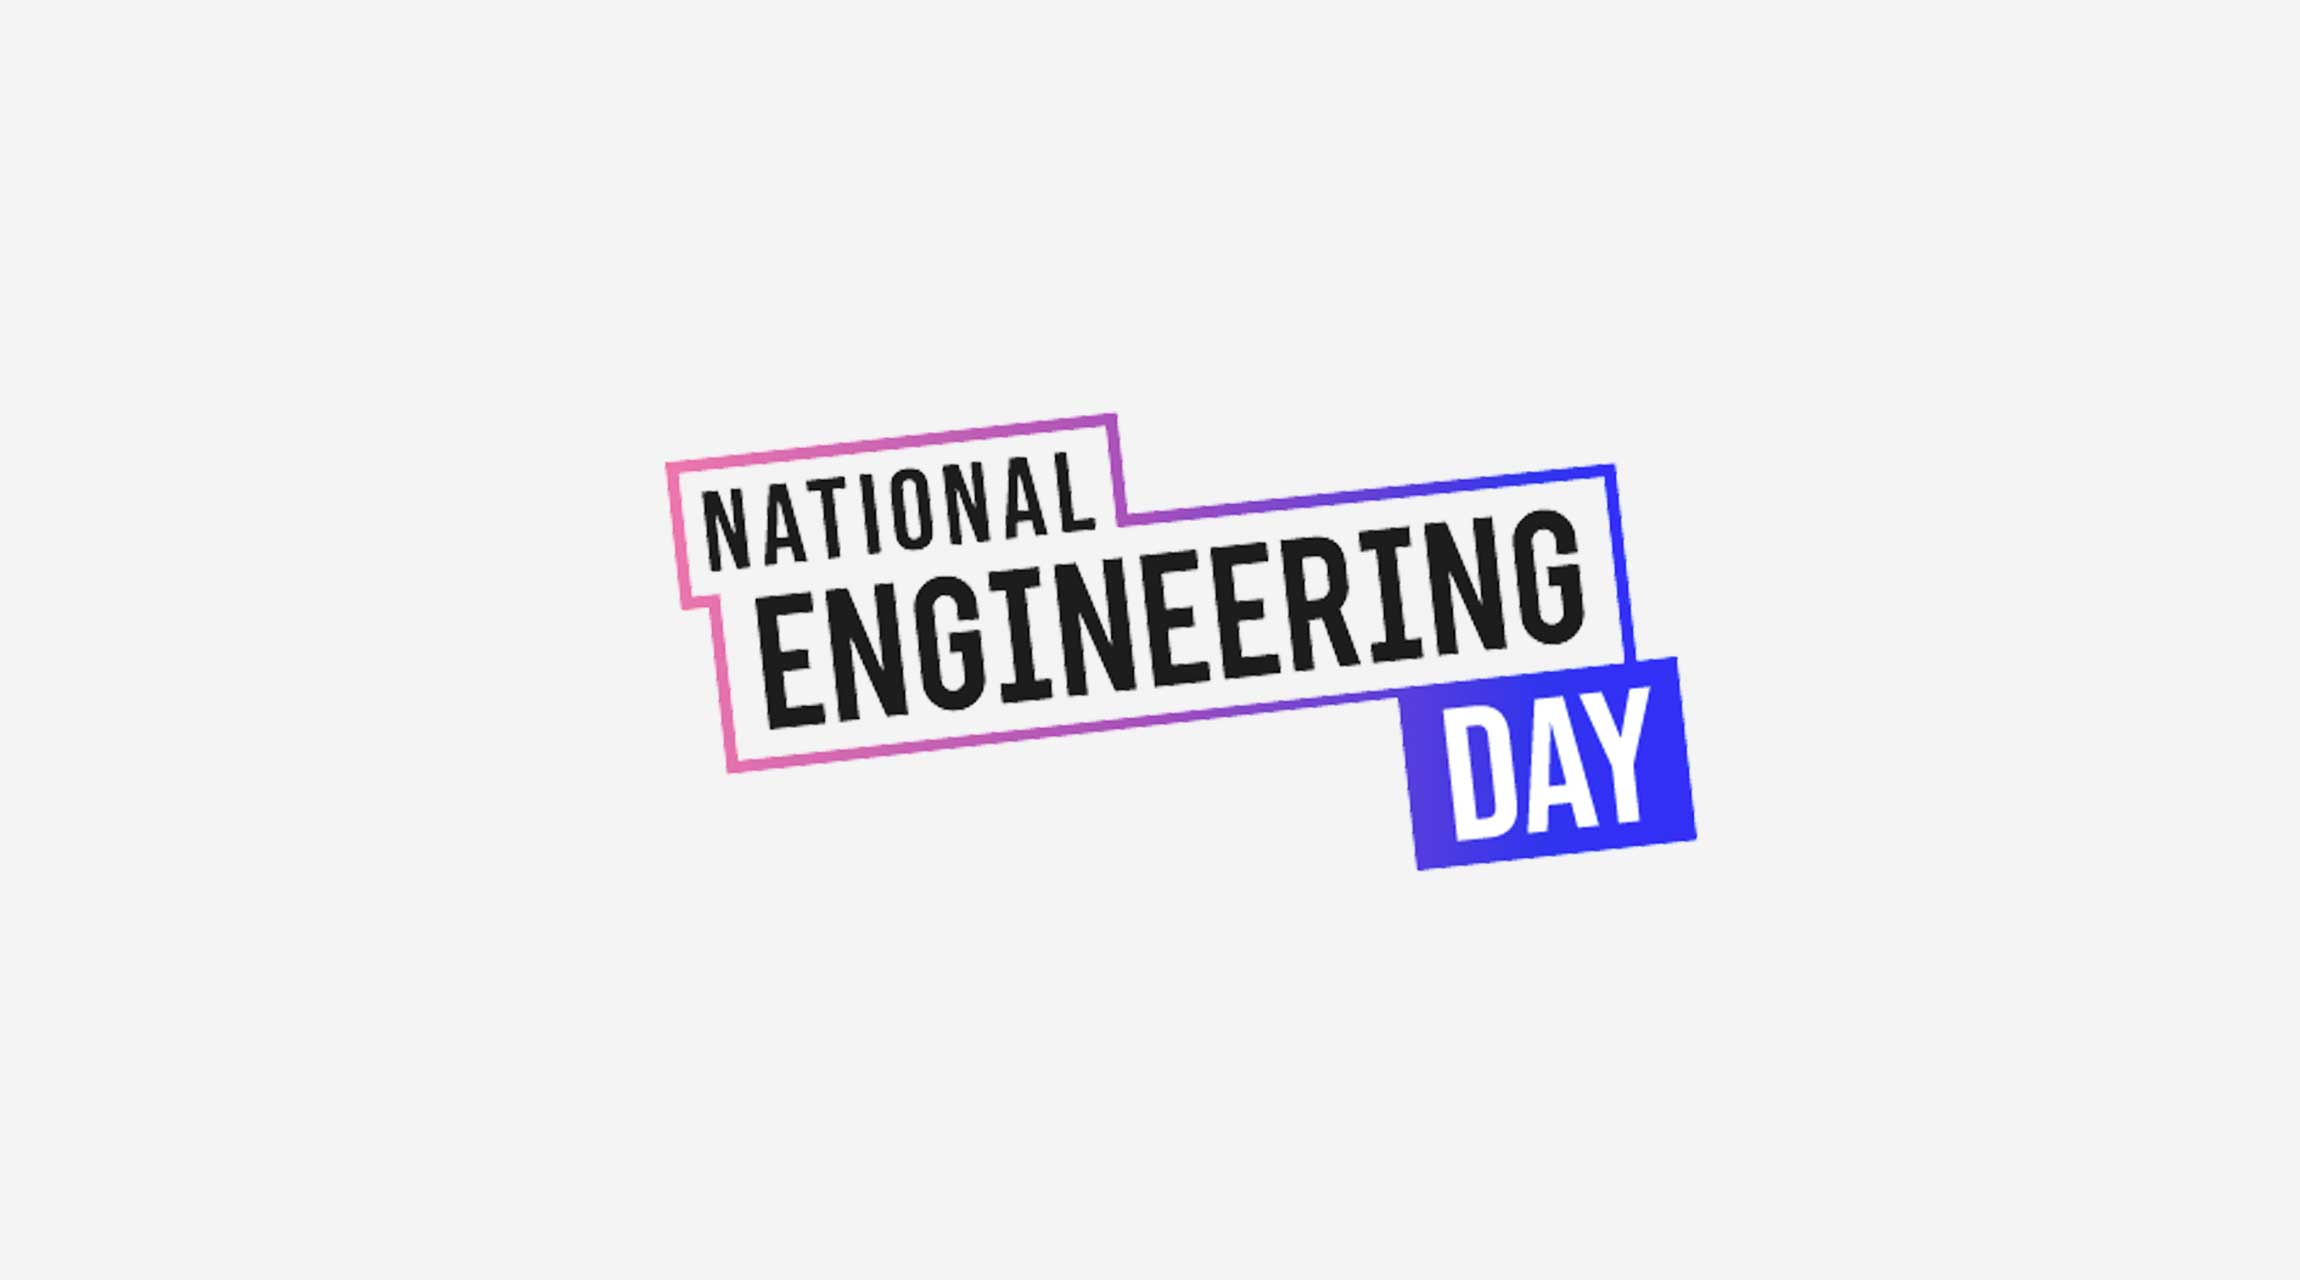 Devin News - National Engineering Day